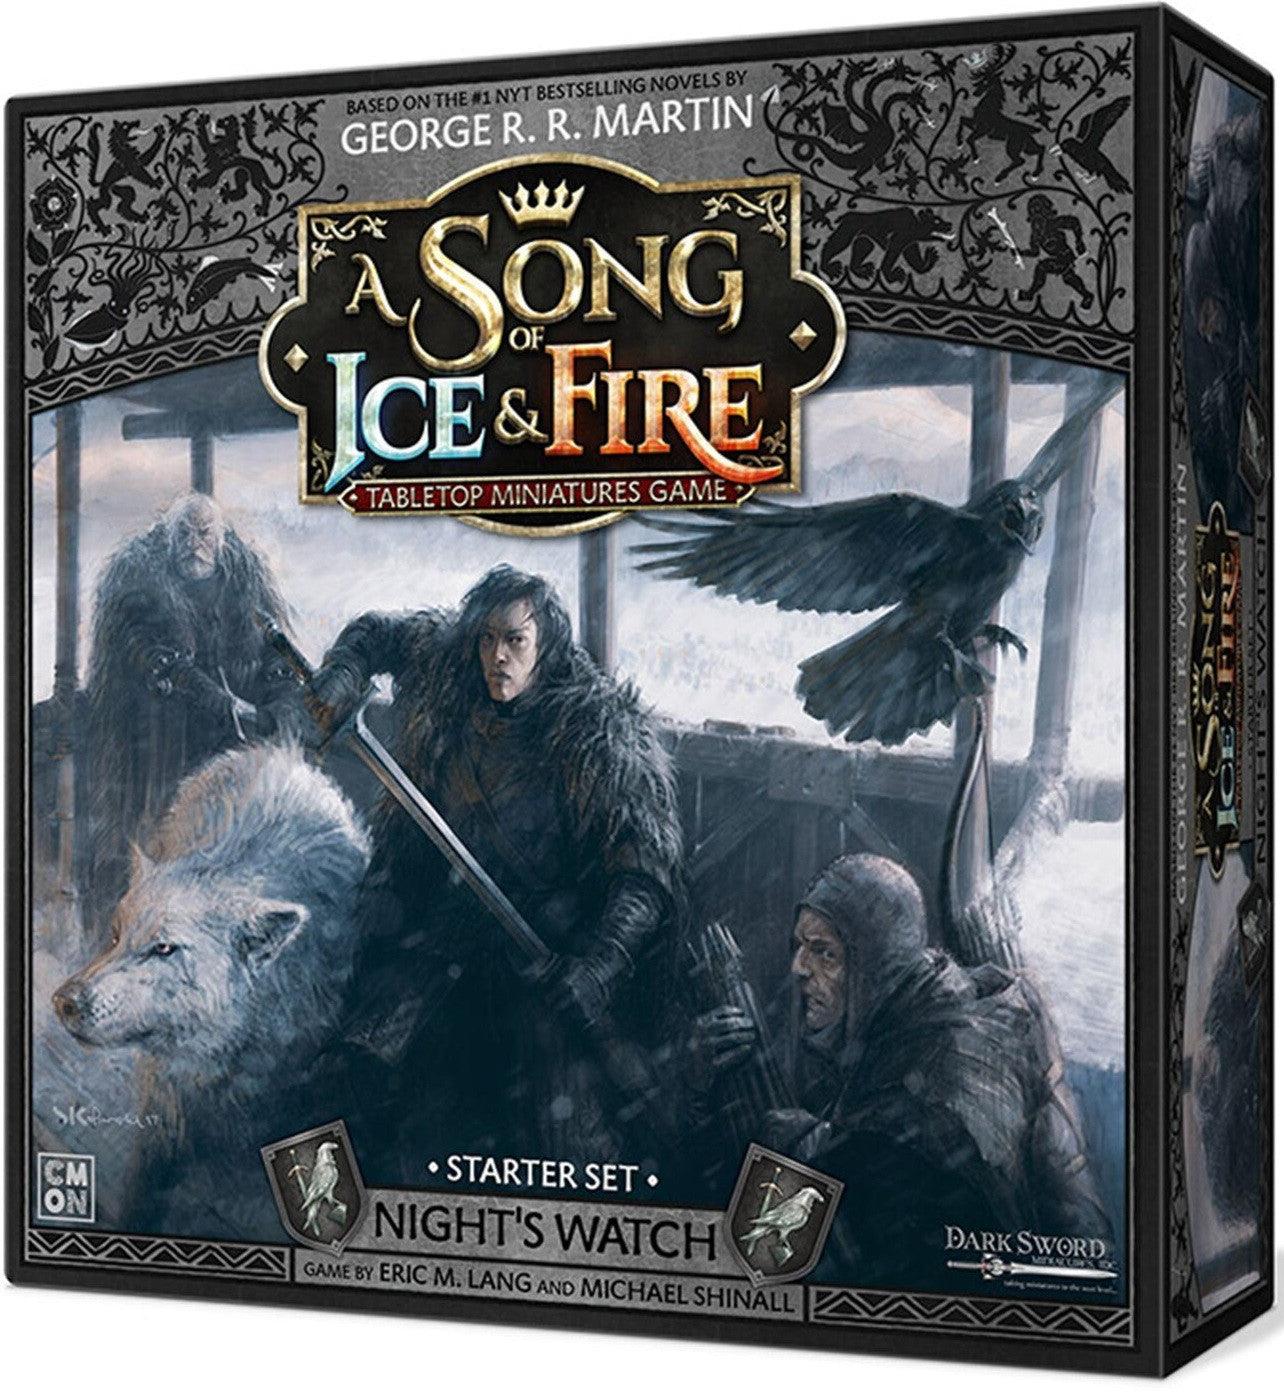 VR-57119 A Song of Ice and Fire TMG - Night's Watch Starter Set - CMON - Titan Pop Culture